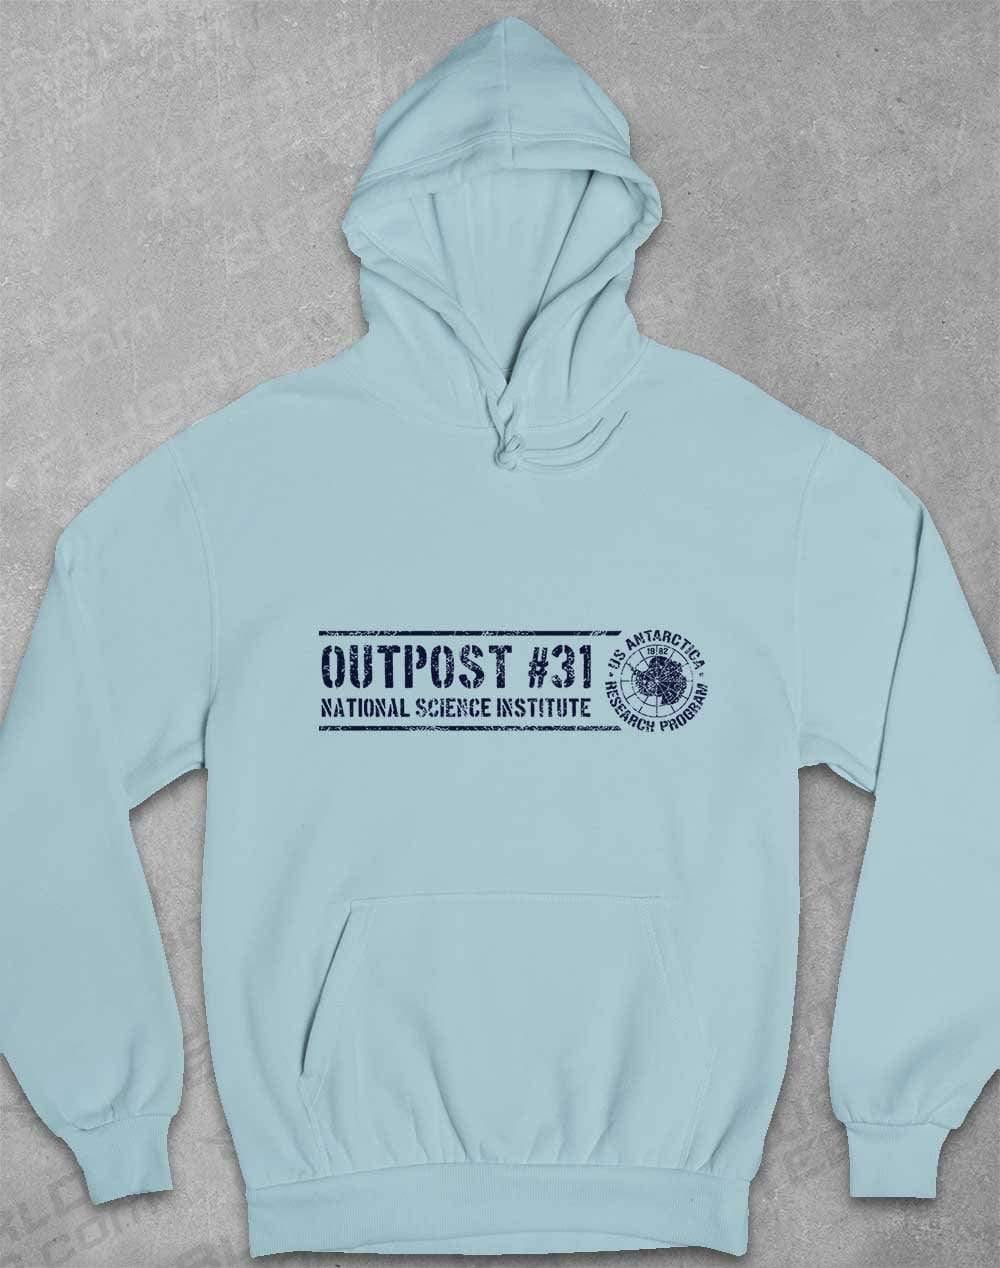 Outpost 31 Antarctica Hoodie XS / Sky Blue  - Off World Tees